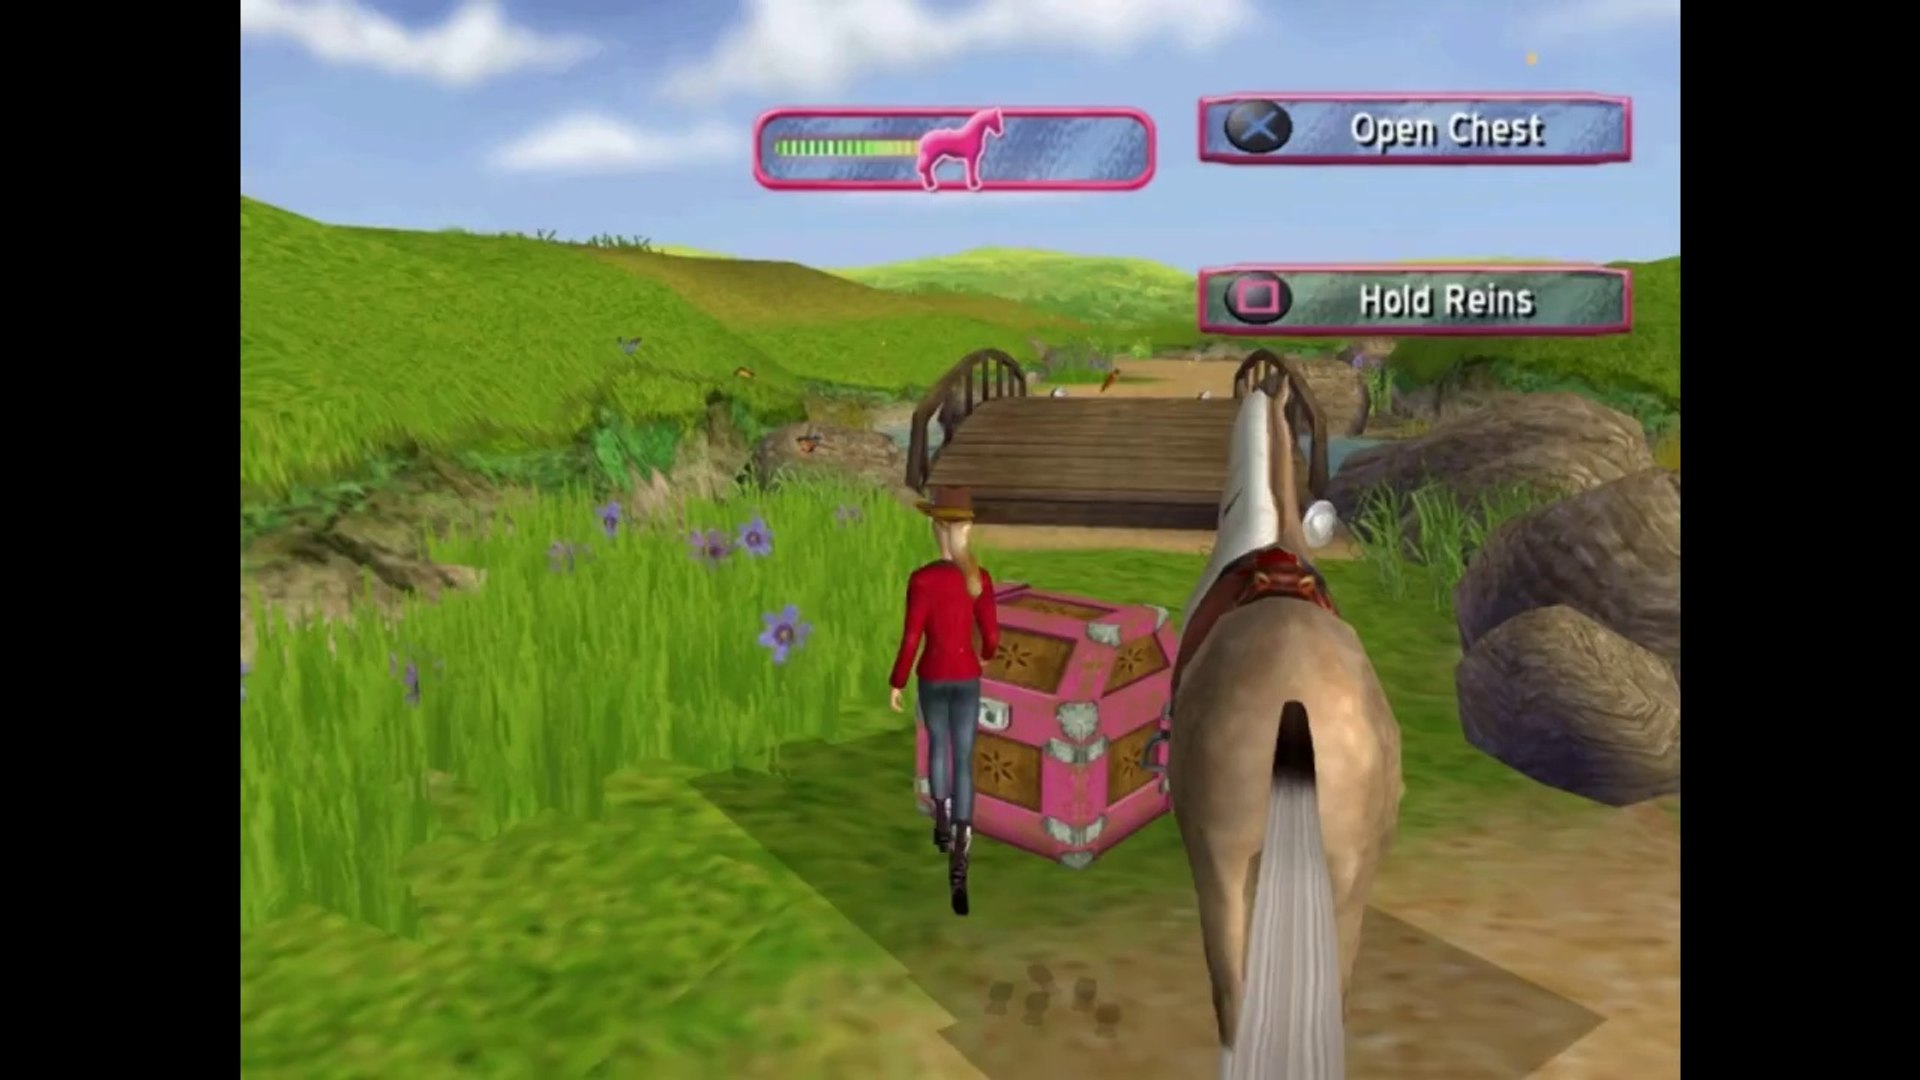 Barbie Horse Adventures: Riding Camp PS2 Gameplay HD (PCSX2) 